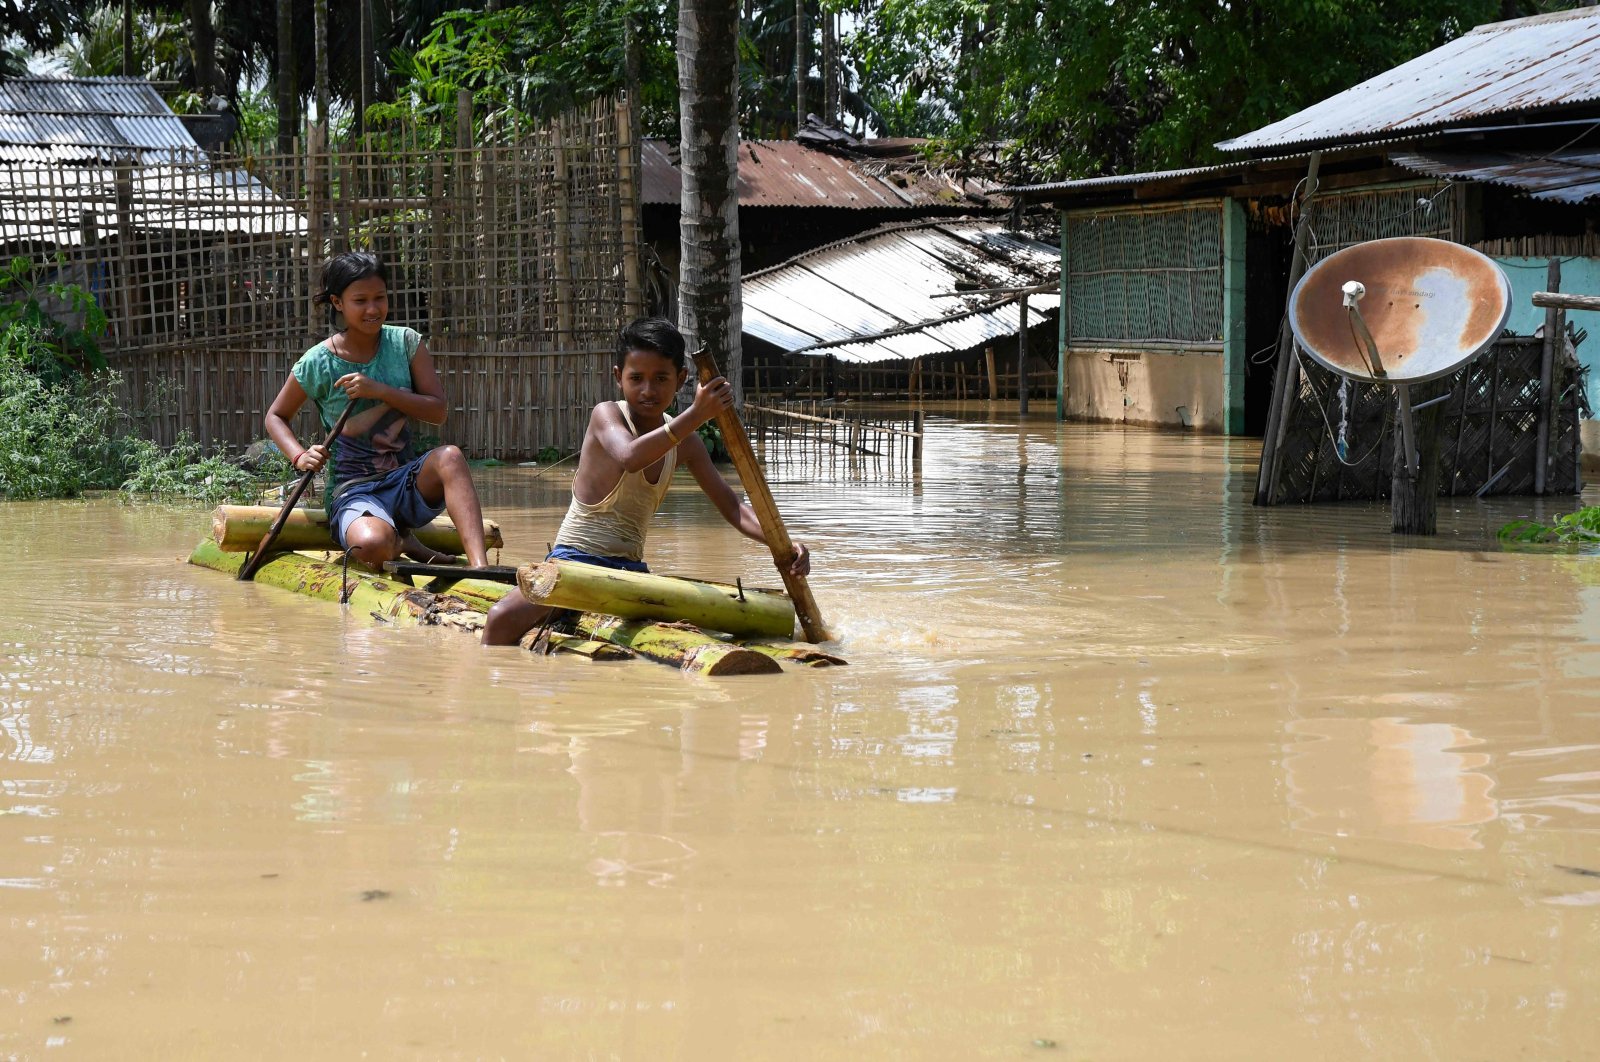 Children ride a bamboo raft through a flooded area after heavy rains in Morigaon district of Assam state, India, May 22, 2022. (AFP Photo)